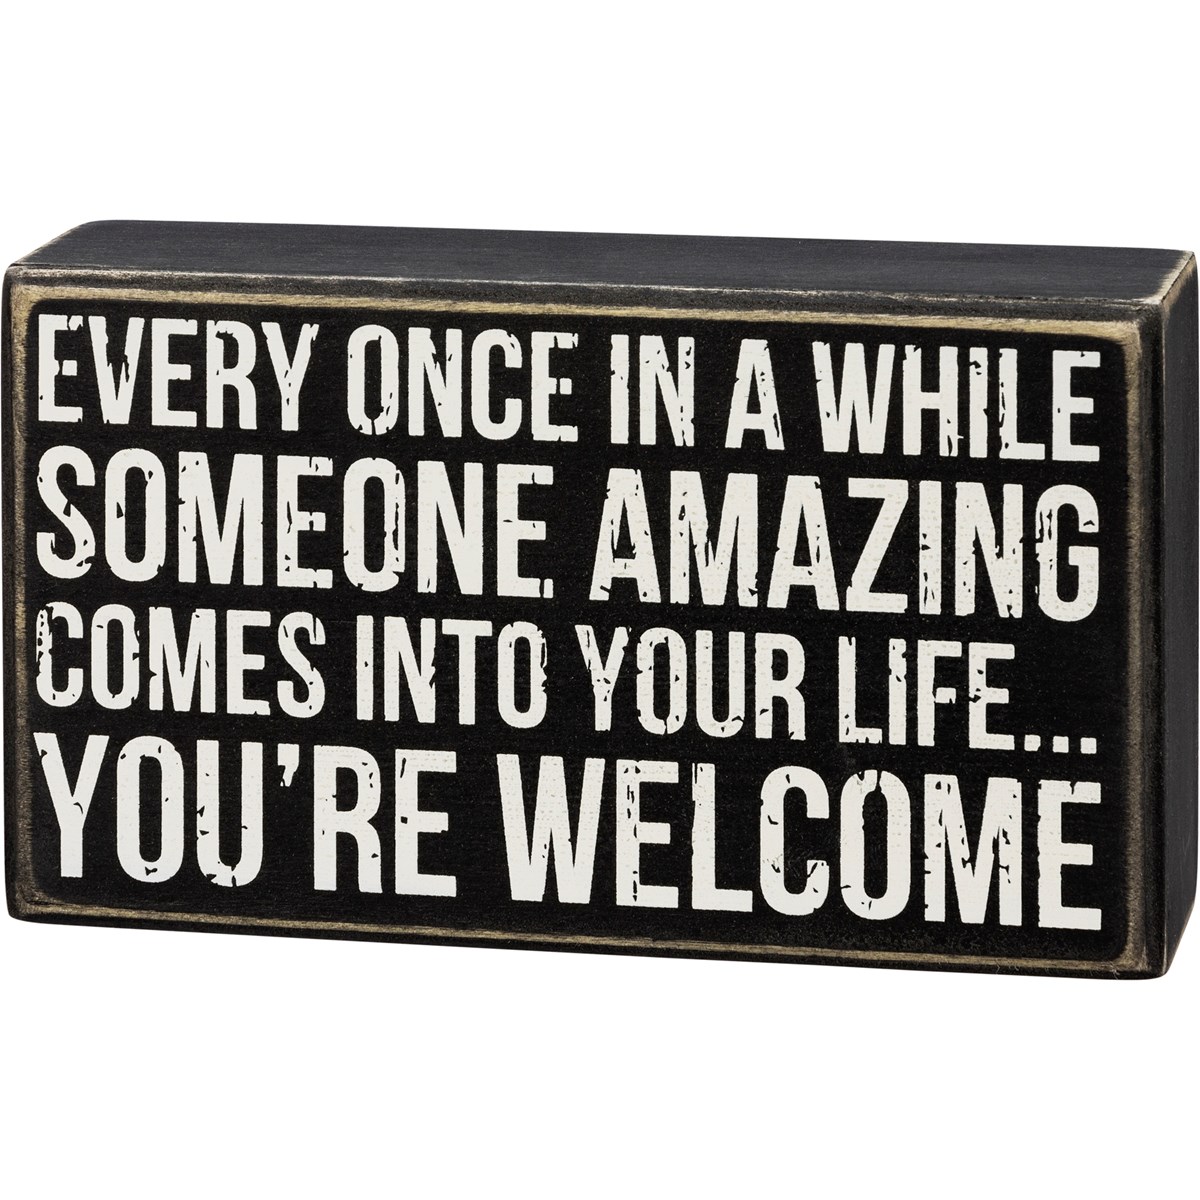 Someone Amazing You're Welcome Box Sign - Wood